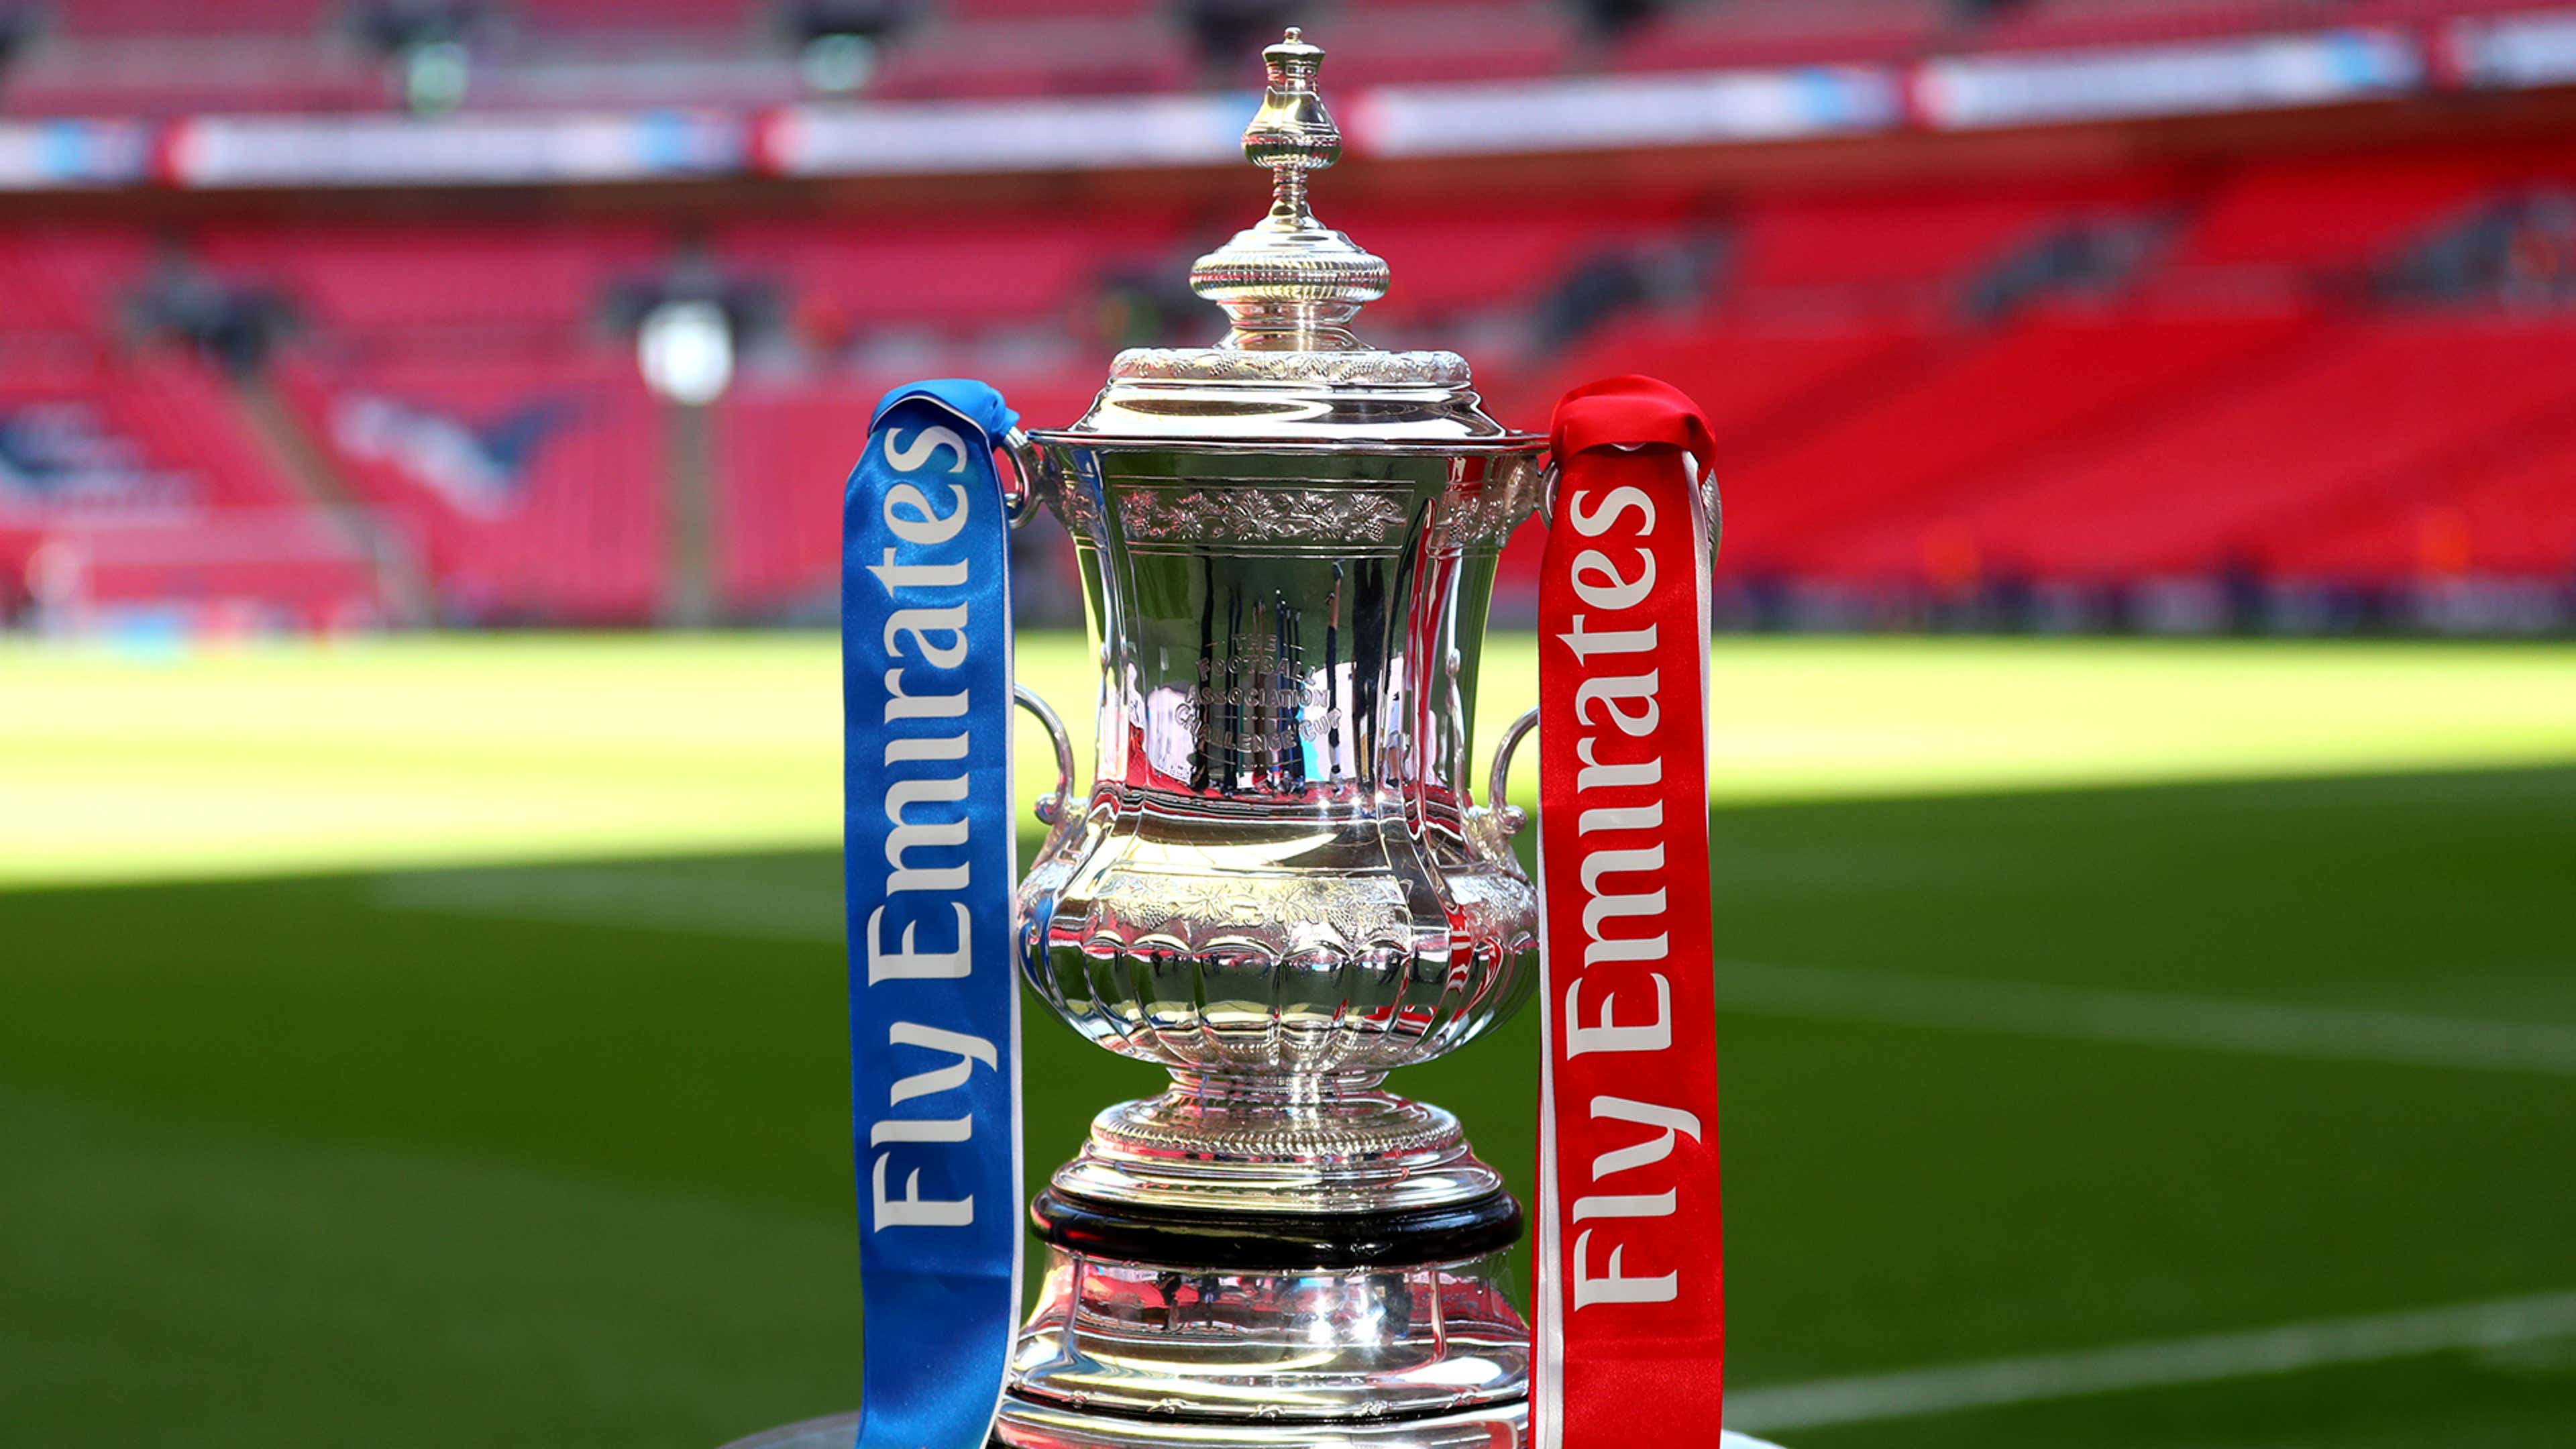 When is the FA Cup 201920 final & will fans be allowed to attend